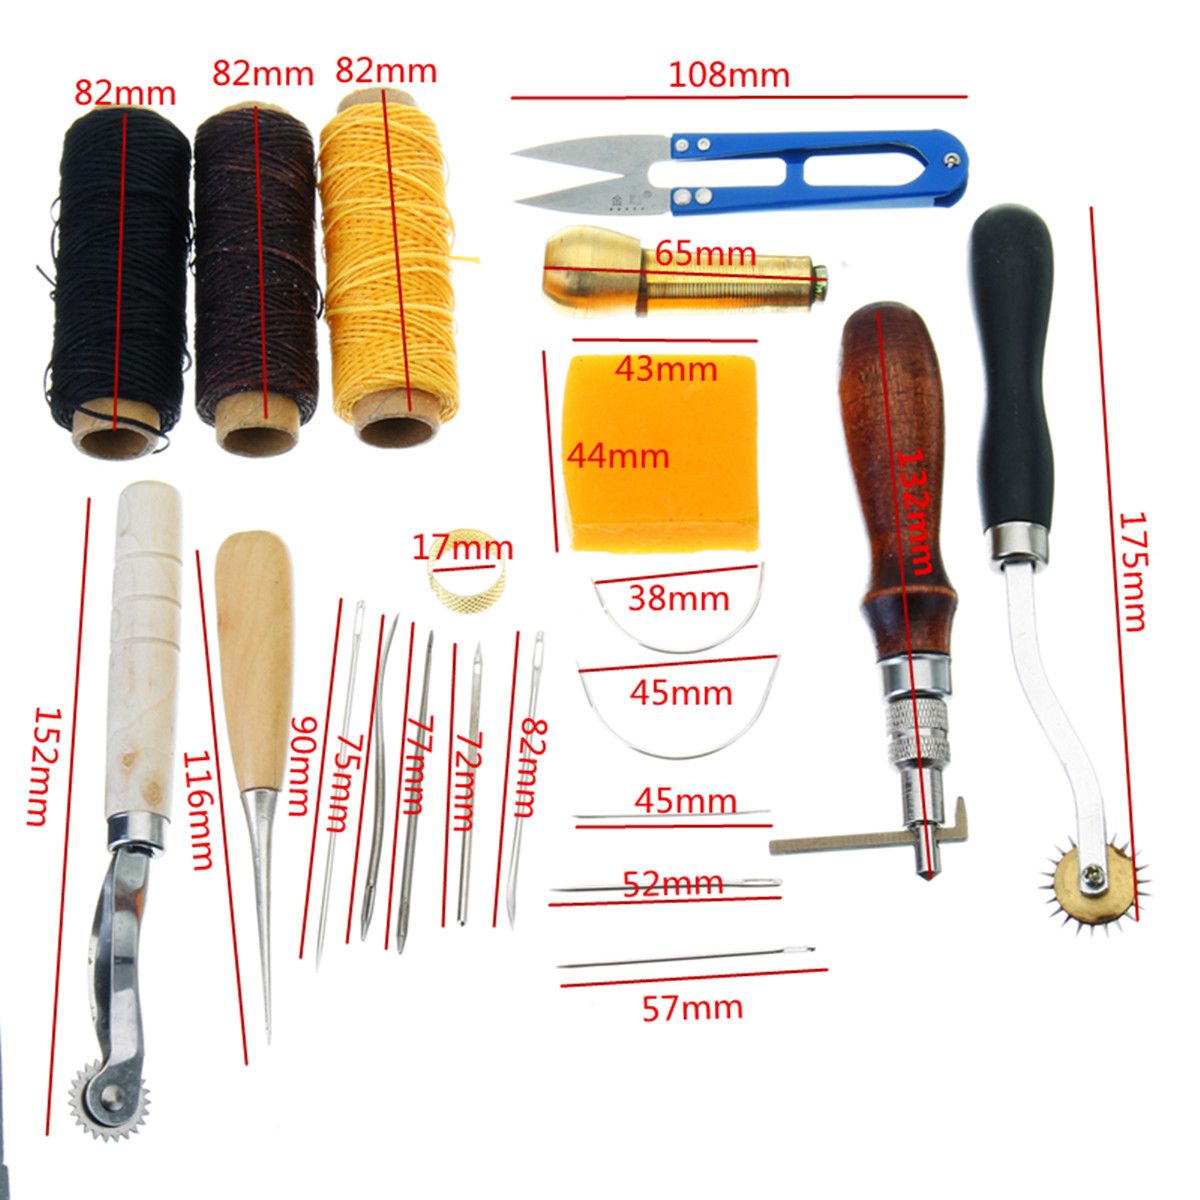 12Pcs-Leather-Craft-Hand-Stitching-Sewing-Tool-Leather-Hand-Sewing-Tool-Set-1251604